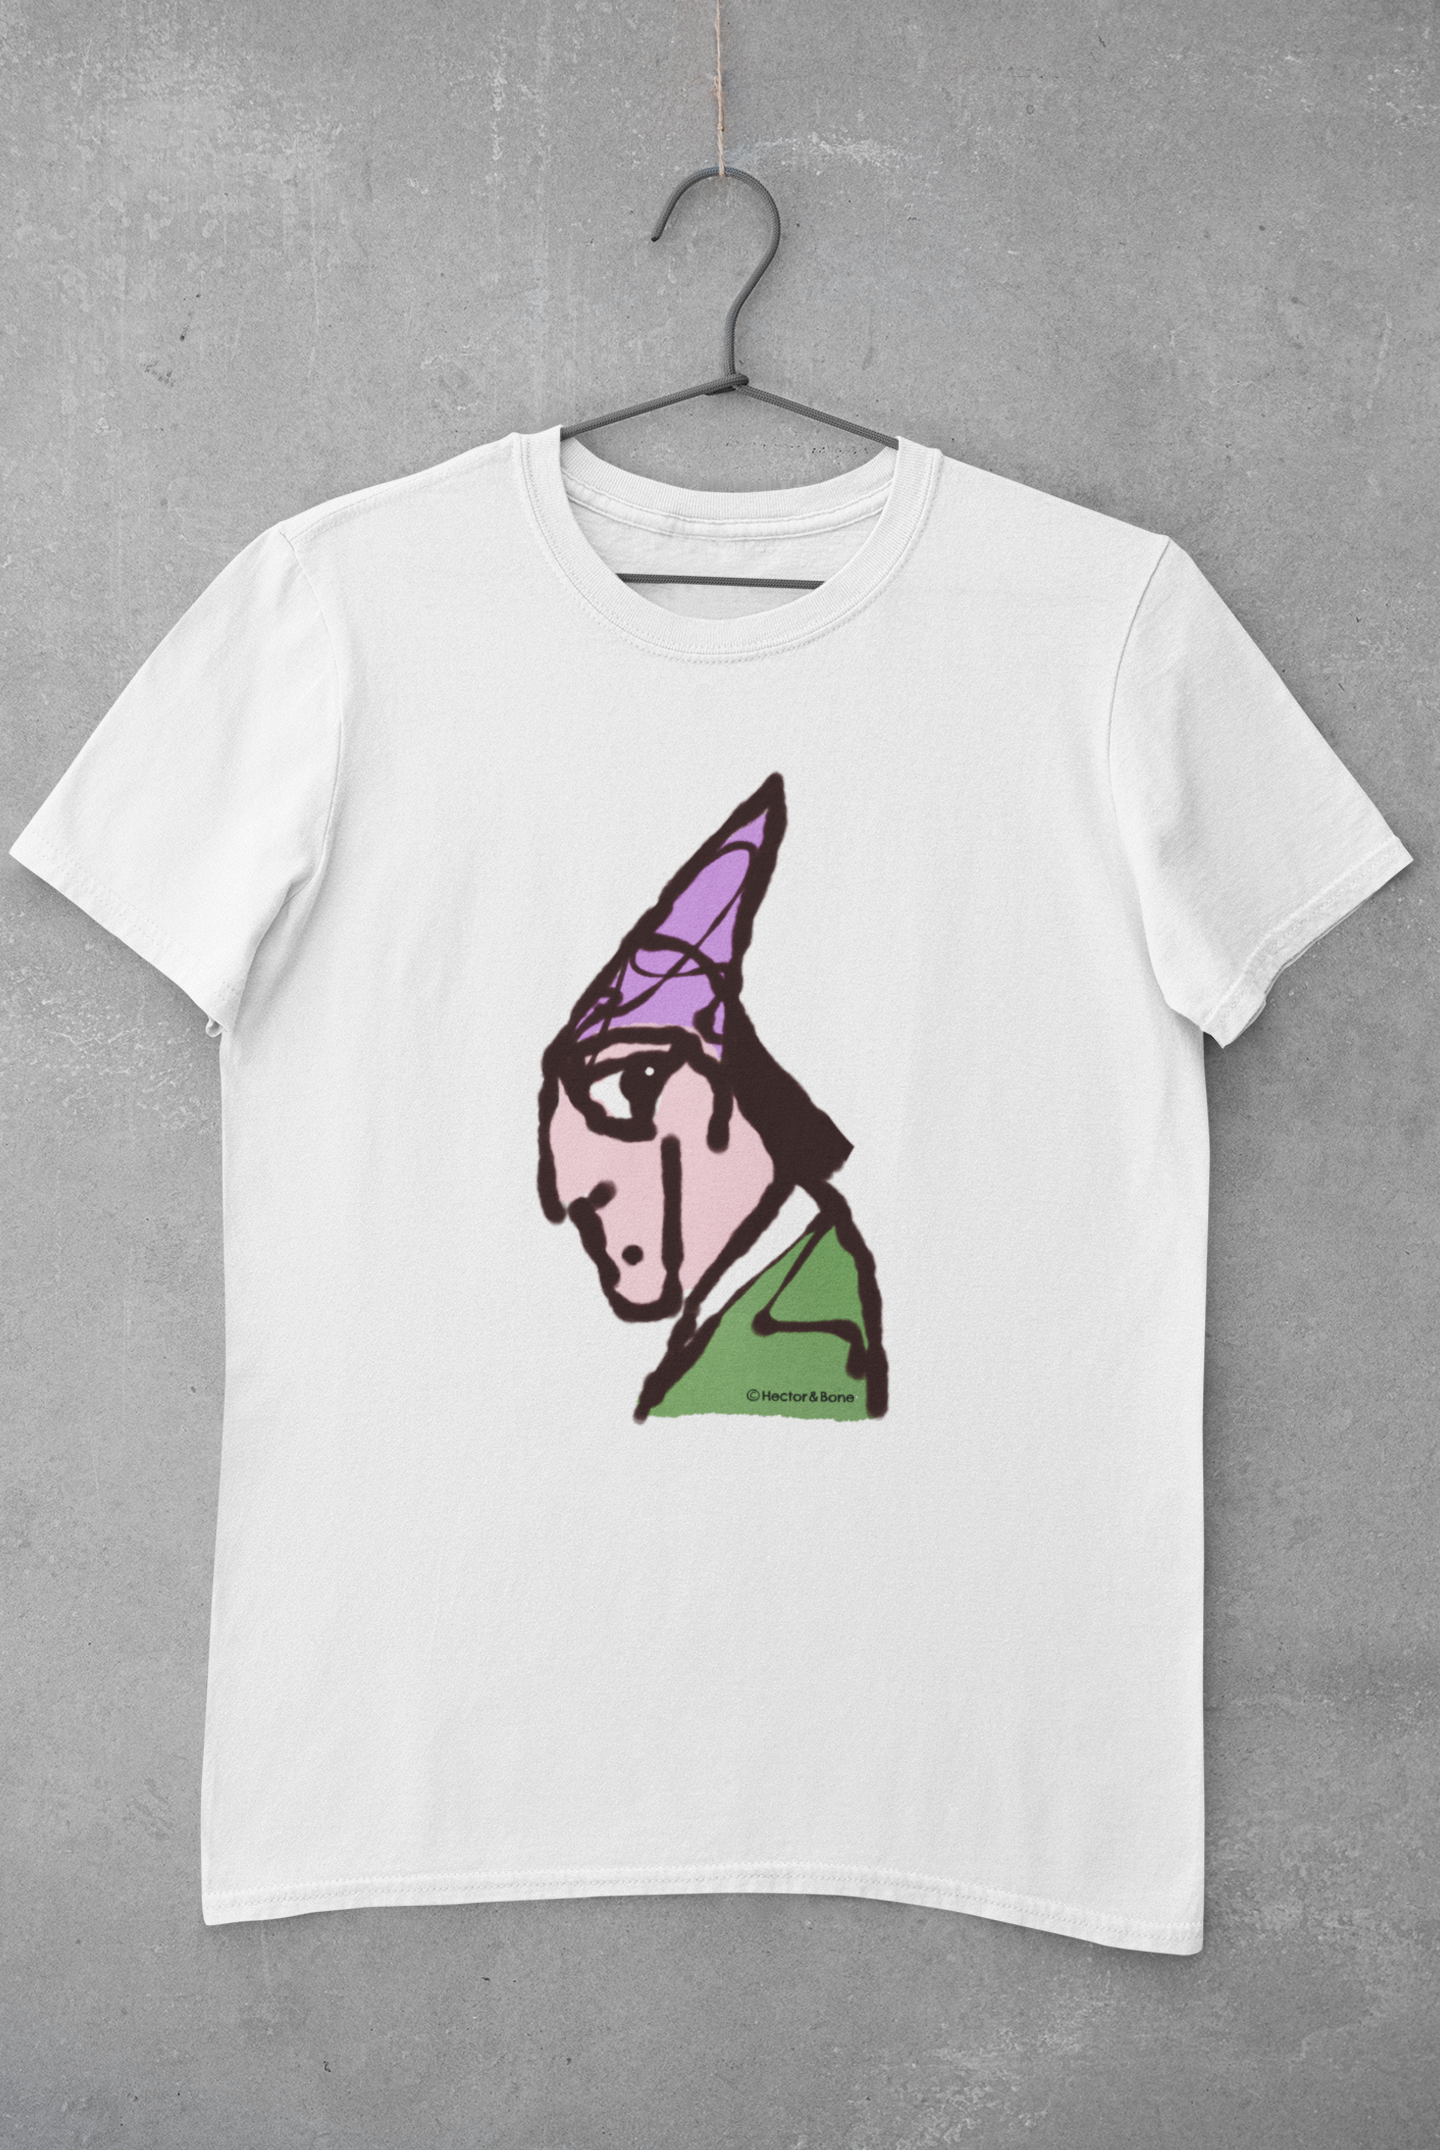 Wizard T-shirt - Illustrated magical Wizard t-shirts on vegan white cotton by Hector and Bone